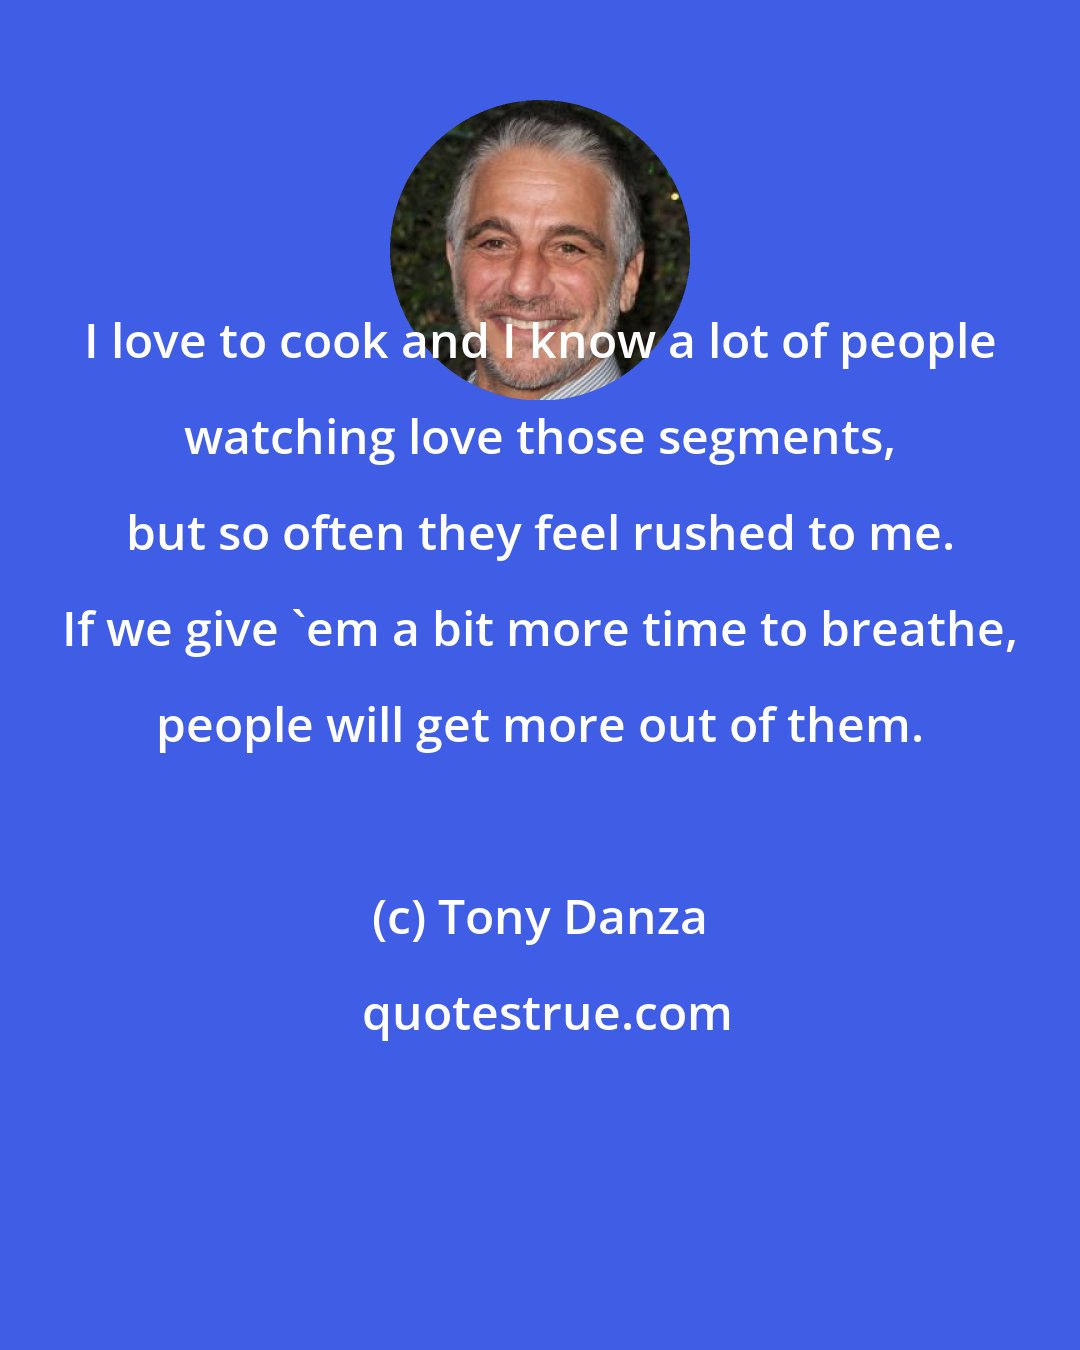 Tony Danza: I love to cook and I know a lot of people watching love those segments, but so often they feel rushed to me. If we give 'em a bit more time to breathe, people will get more out of them.